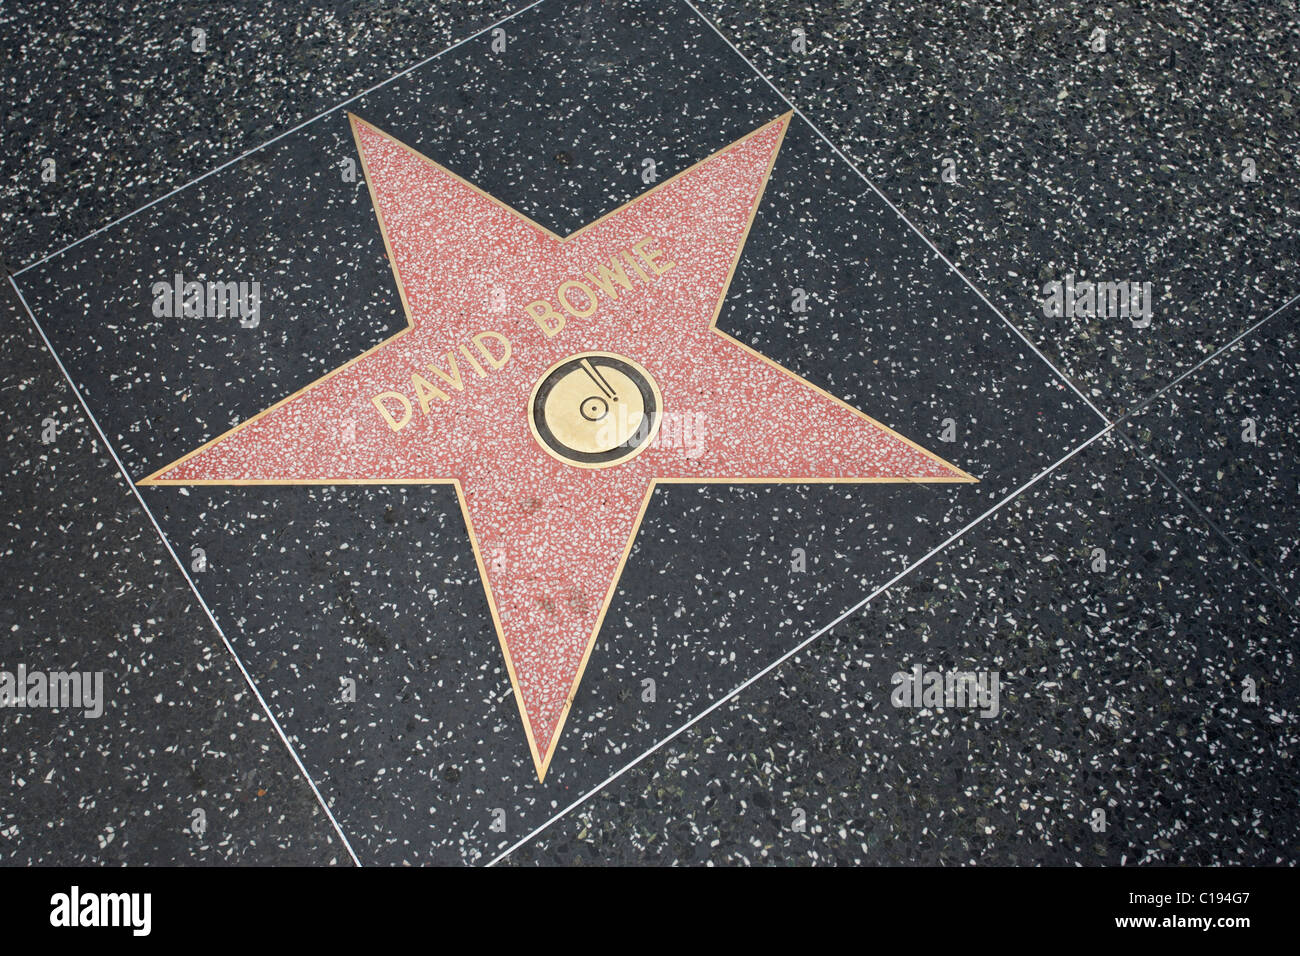 David Bowies Stern auf dem Walk of Fame in Hollywood, Los Angeles, USA. Stockfoto